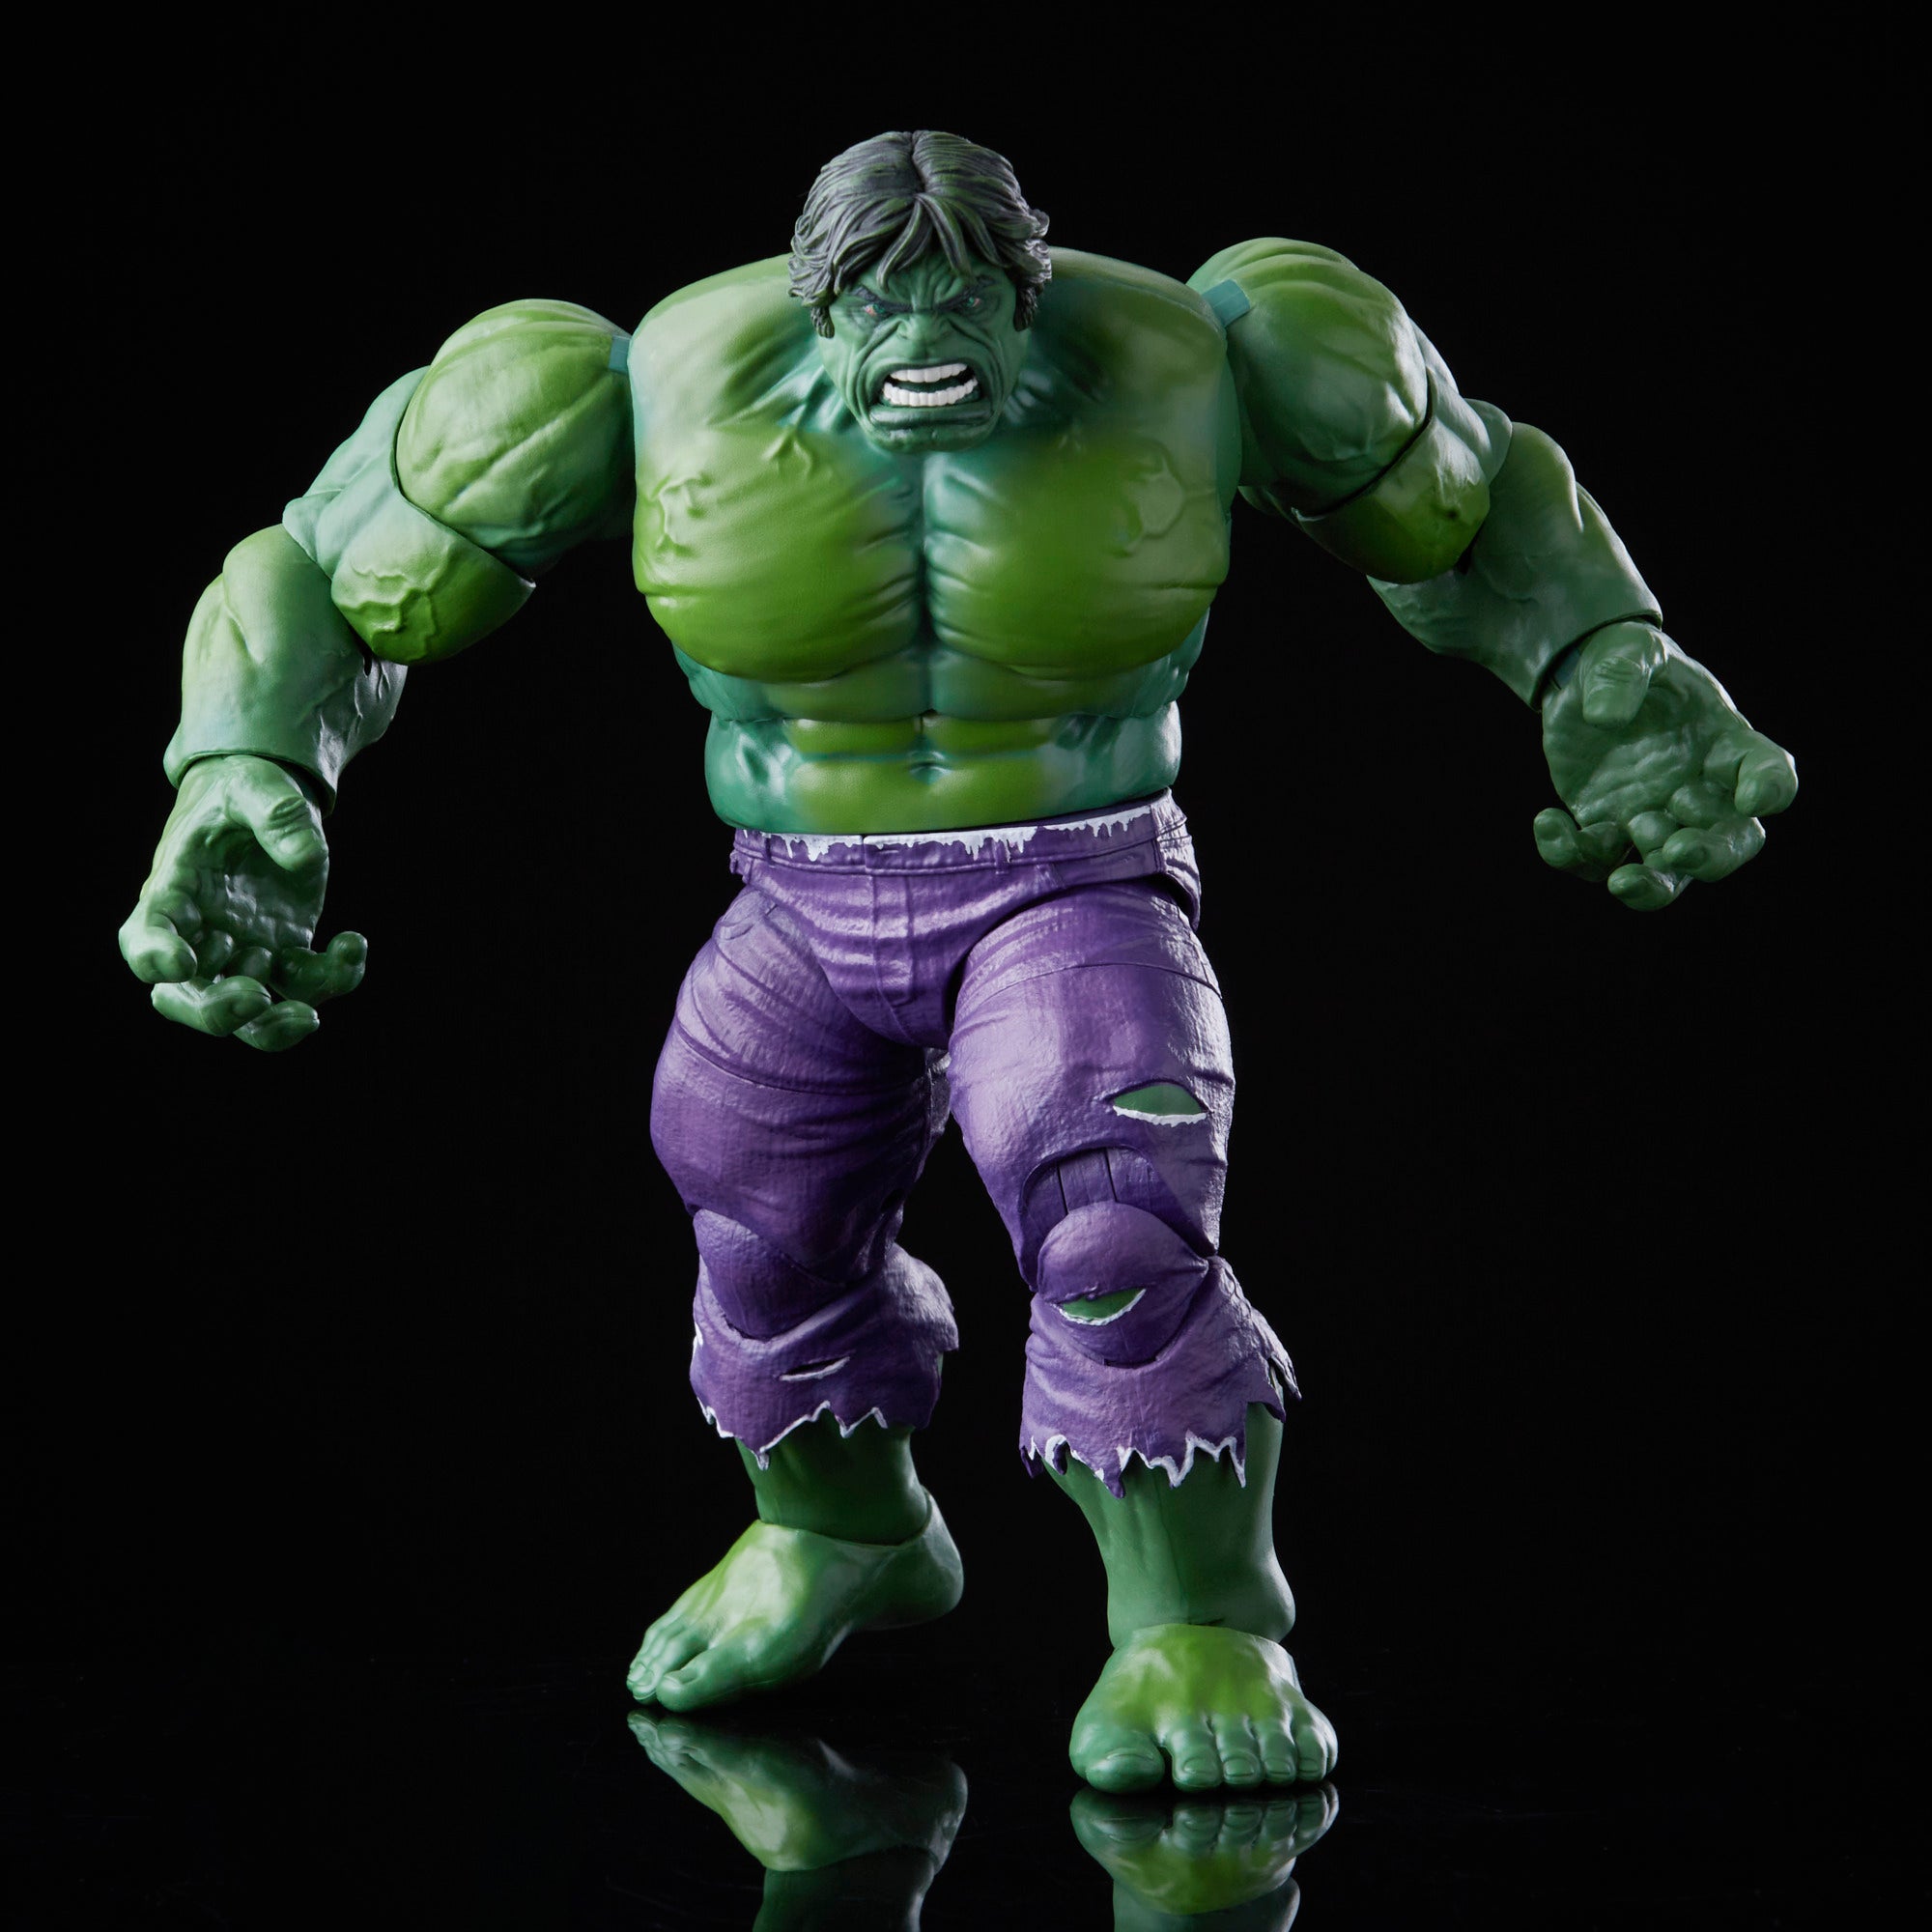 Marvel Select: Incredible Hulk Action Figure for 14 years and up